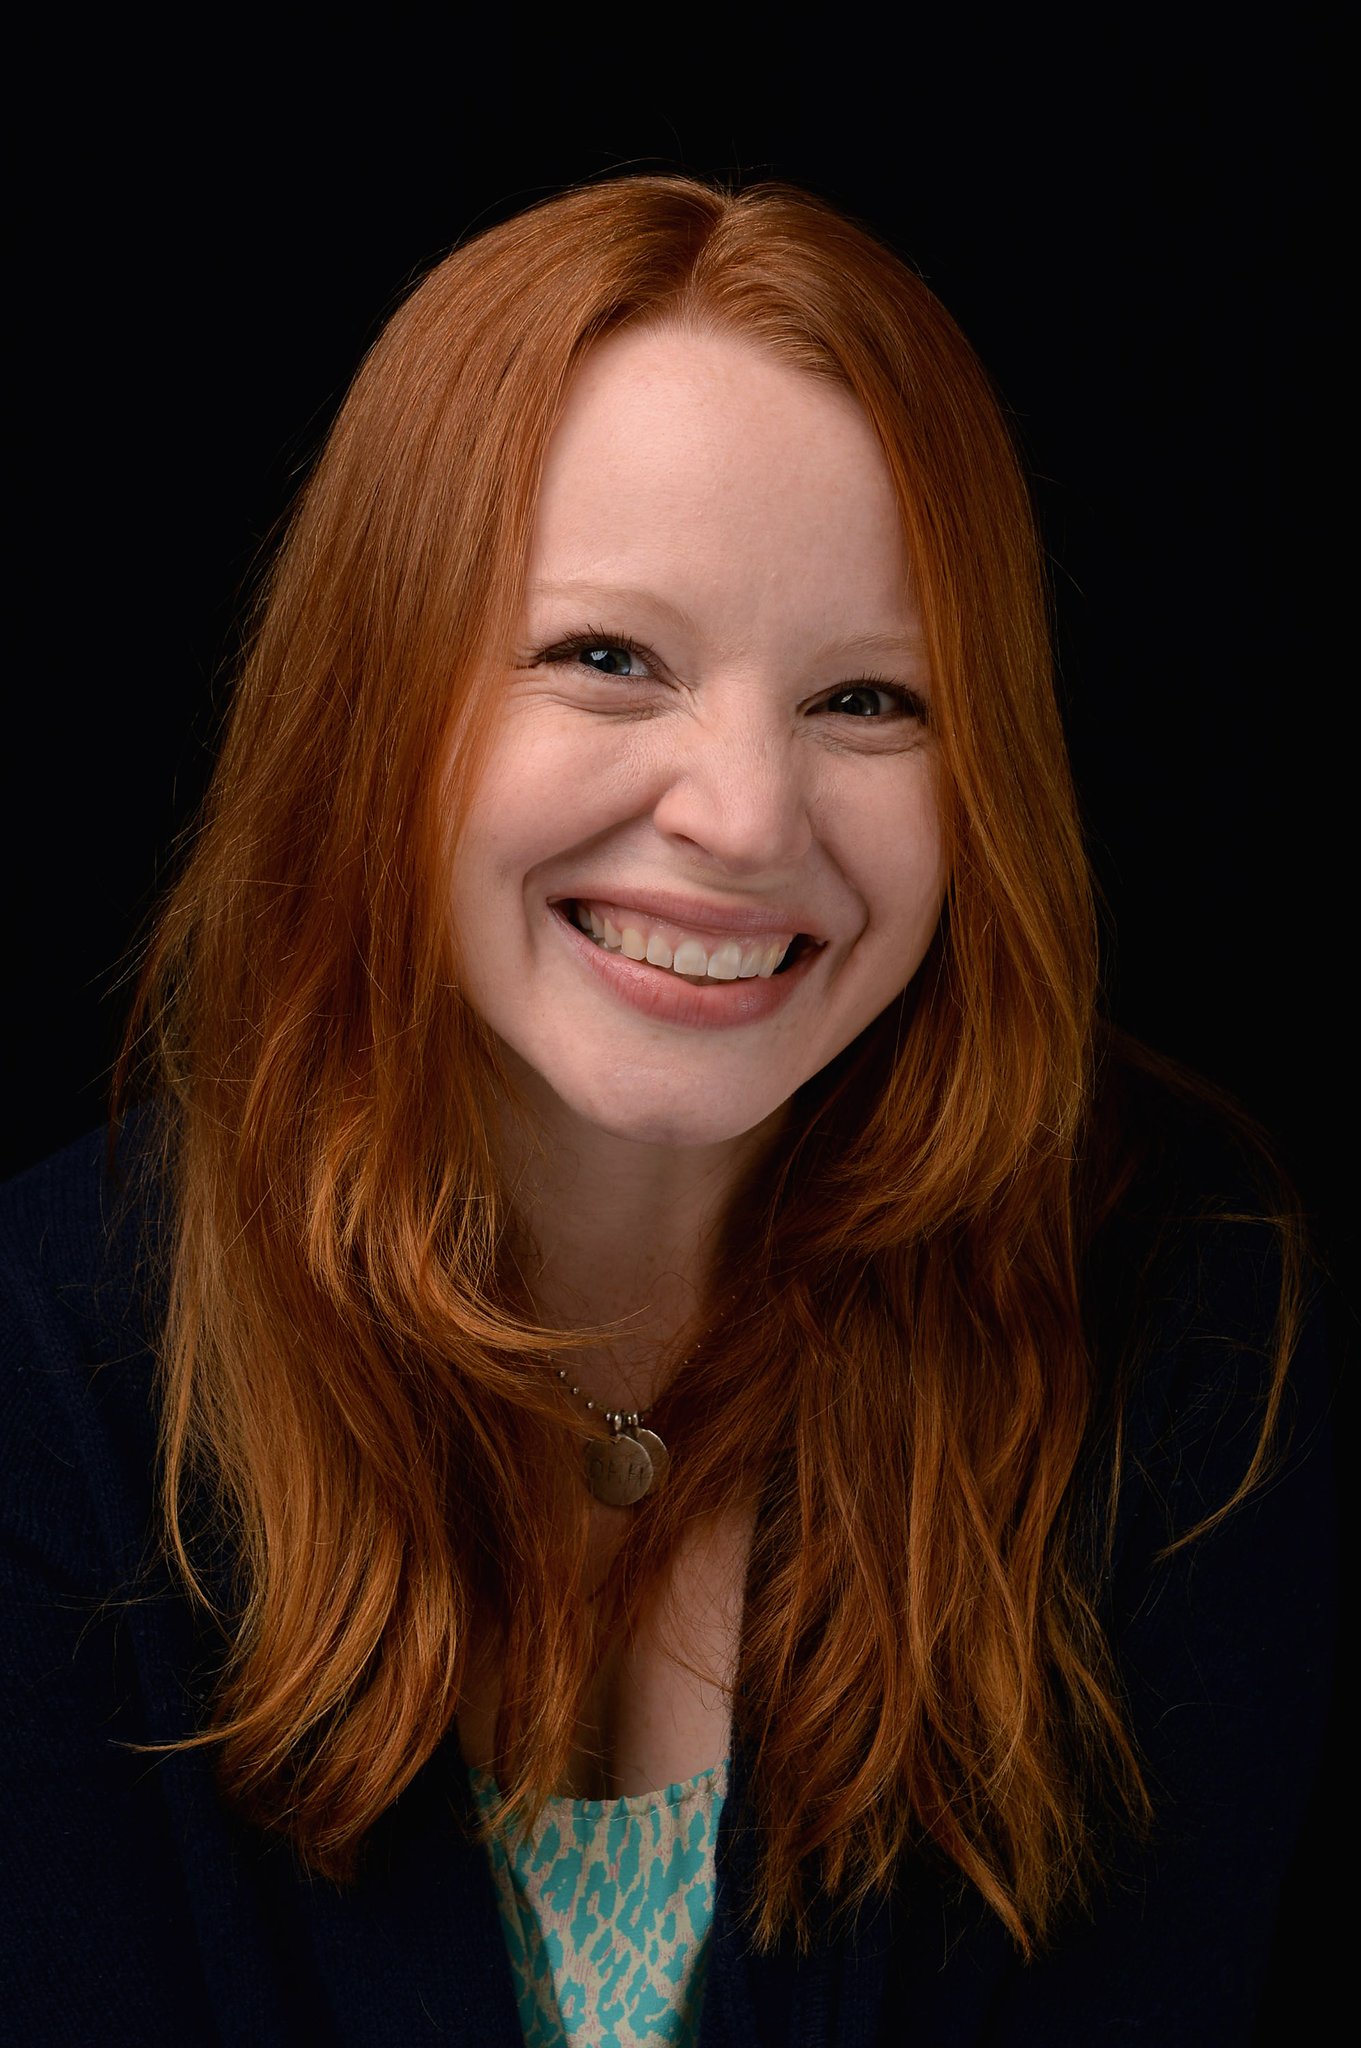 Born on this date Happy Birthday to actress and singer Lauren Ambrose born on February 20, 1978 